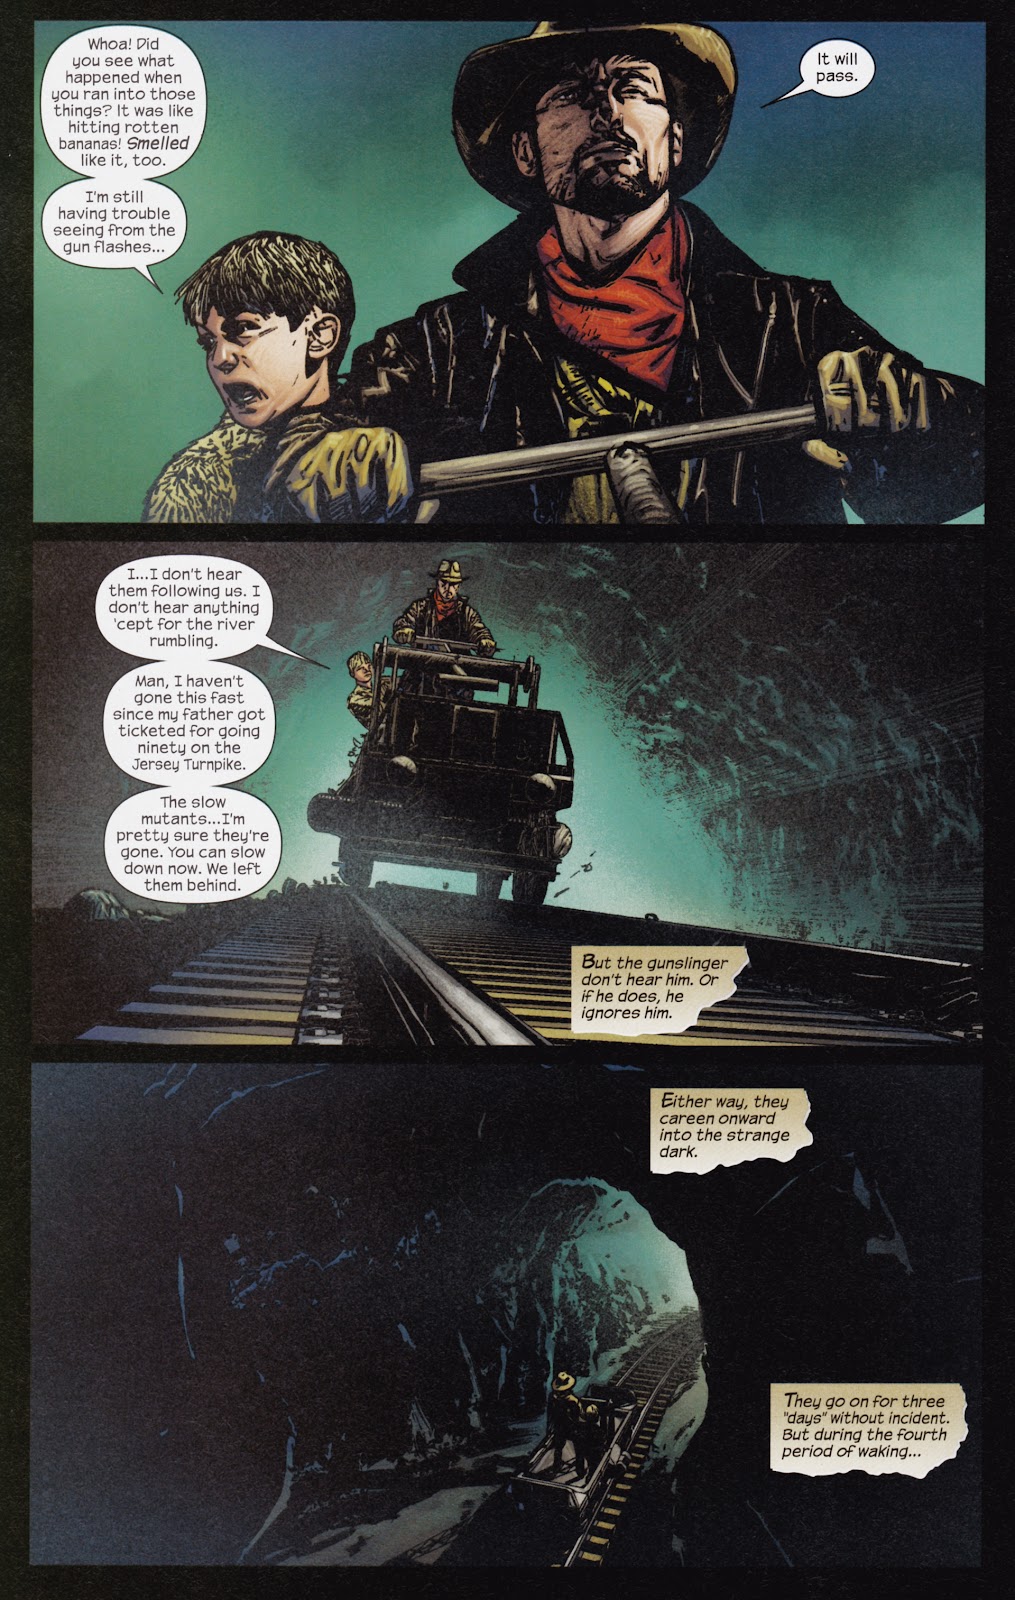 Dark Tower: The Gunslinger - The Man in Black issue 3 - Page 13